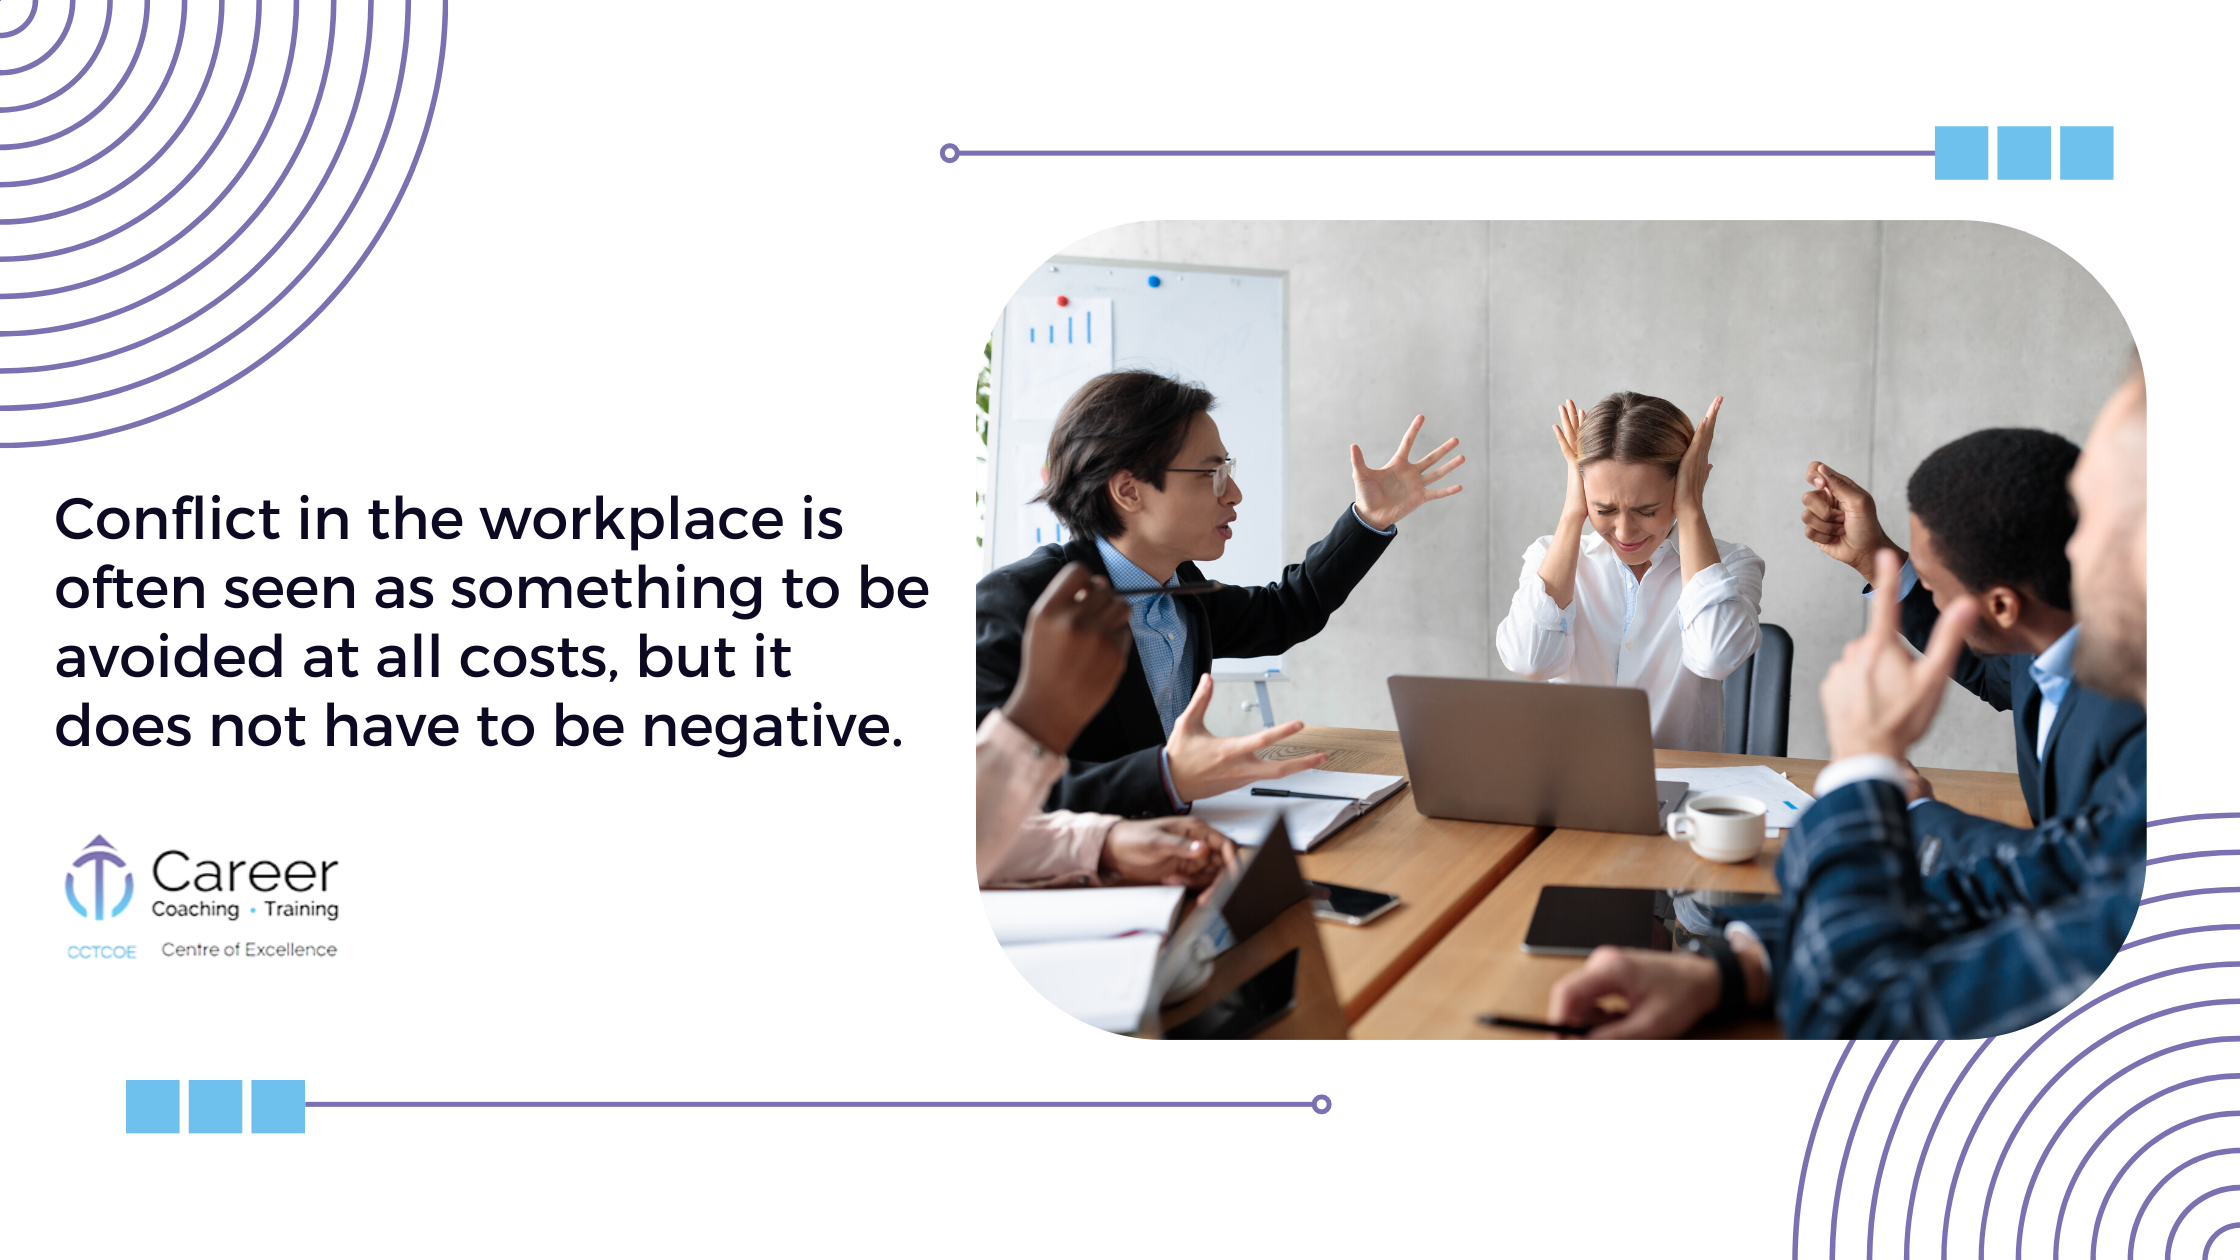 Conflict in the workplace is often seen as something to be avoided at all costs, but it does not have to be negative.